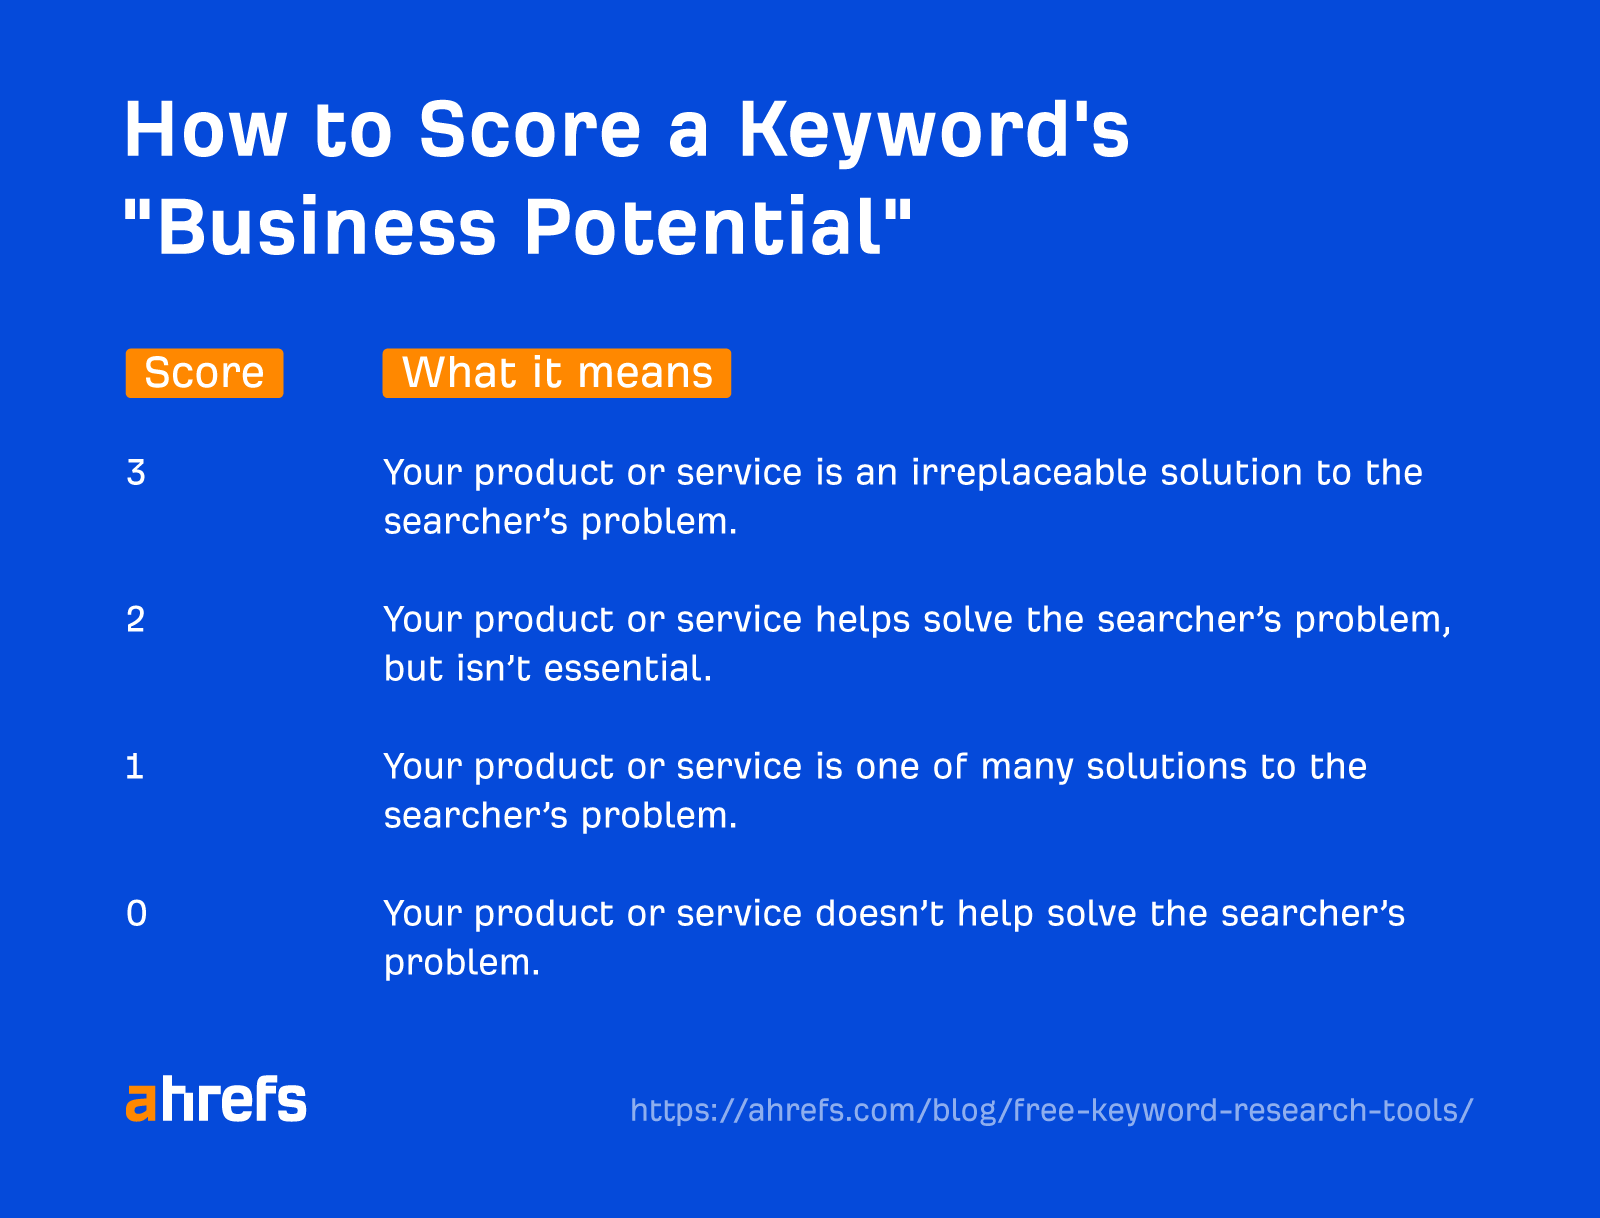 How to score a keyword's business potential